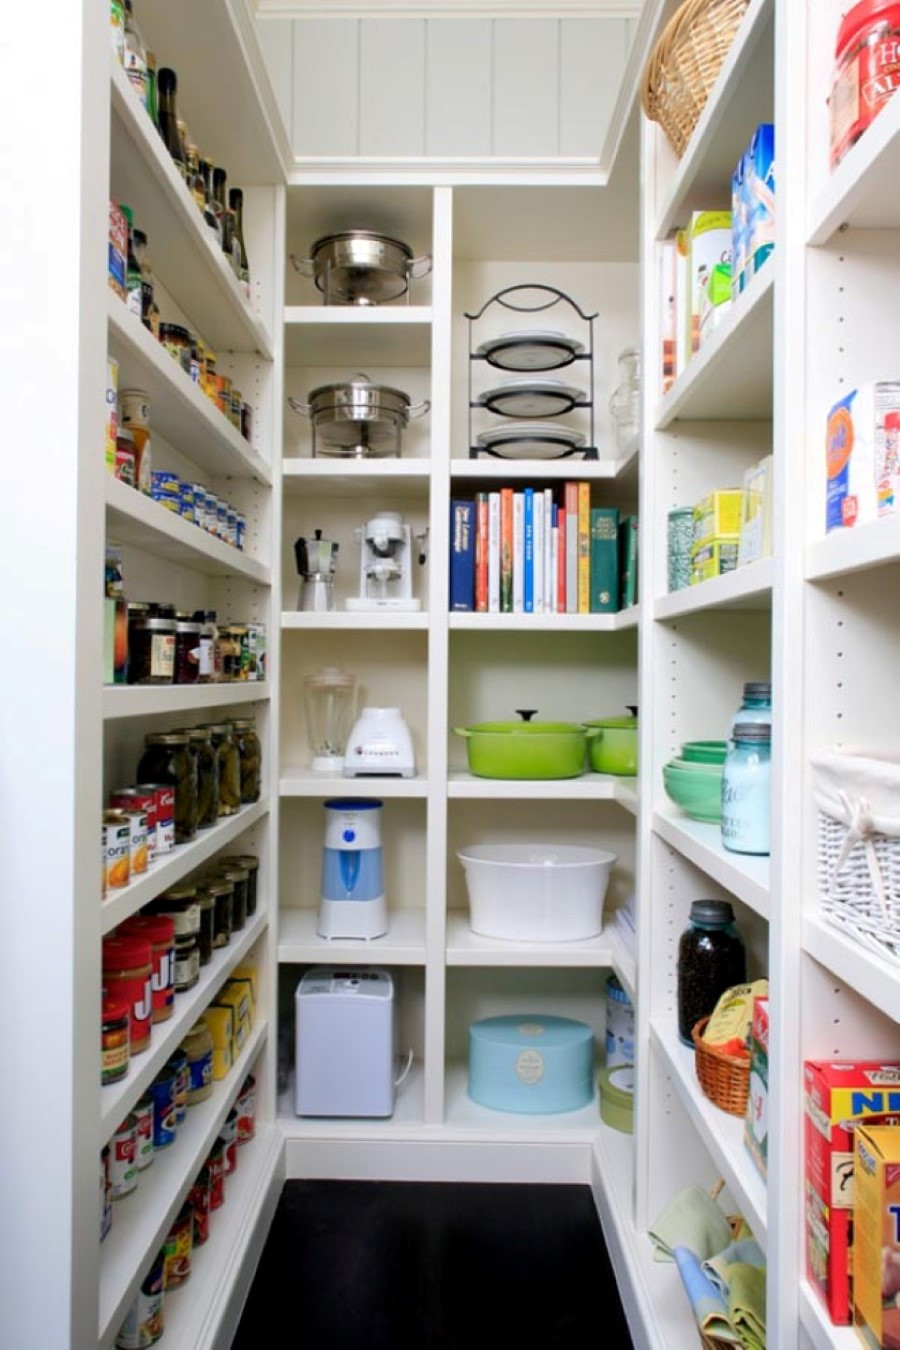 Kitchen Storage Pantry
 15 Kitchen Pantry Ideas With Form And Function